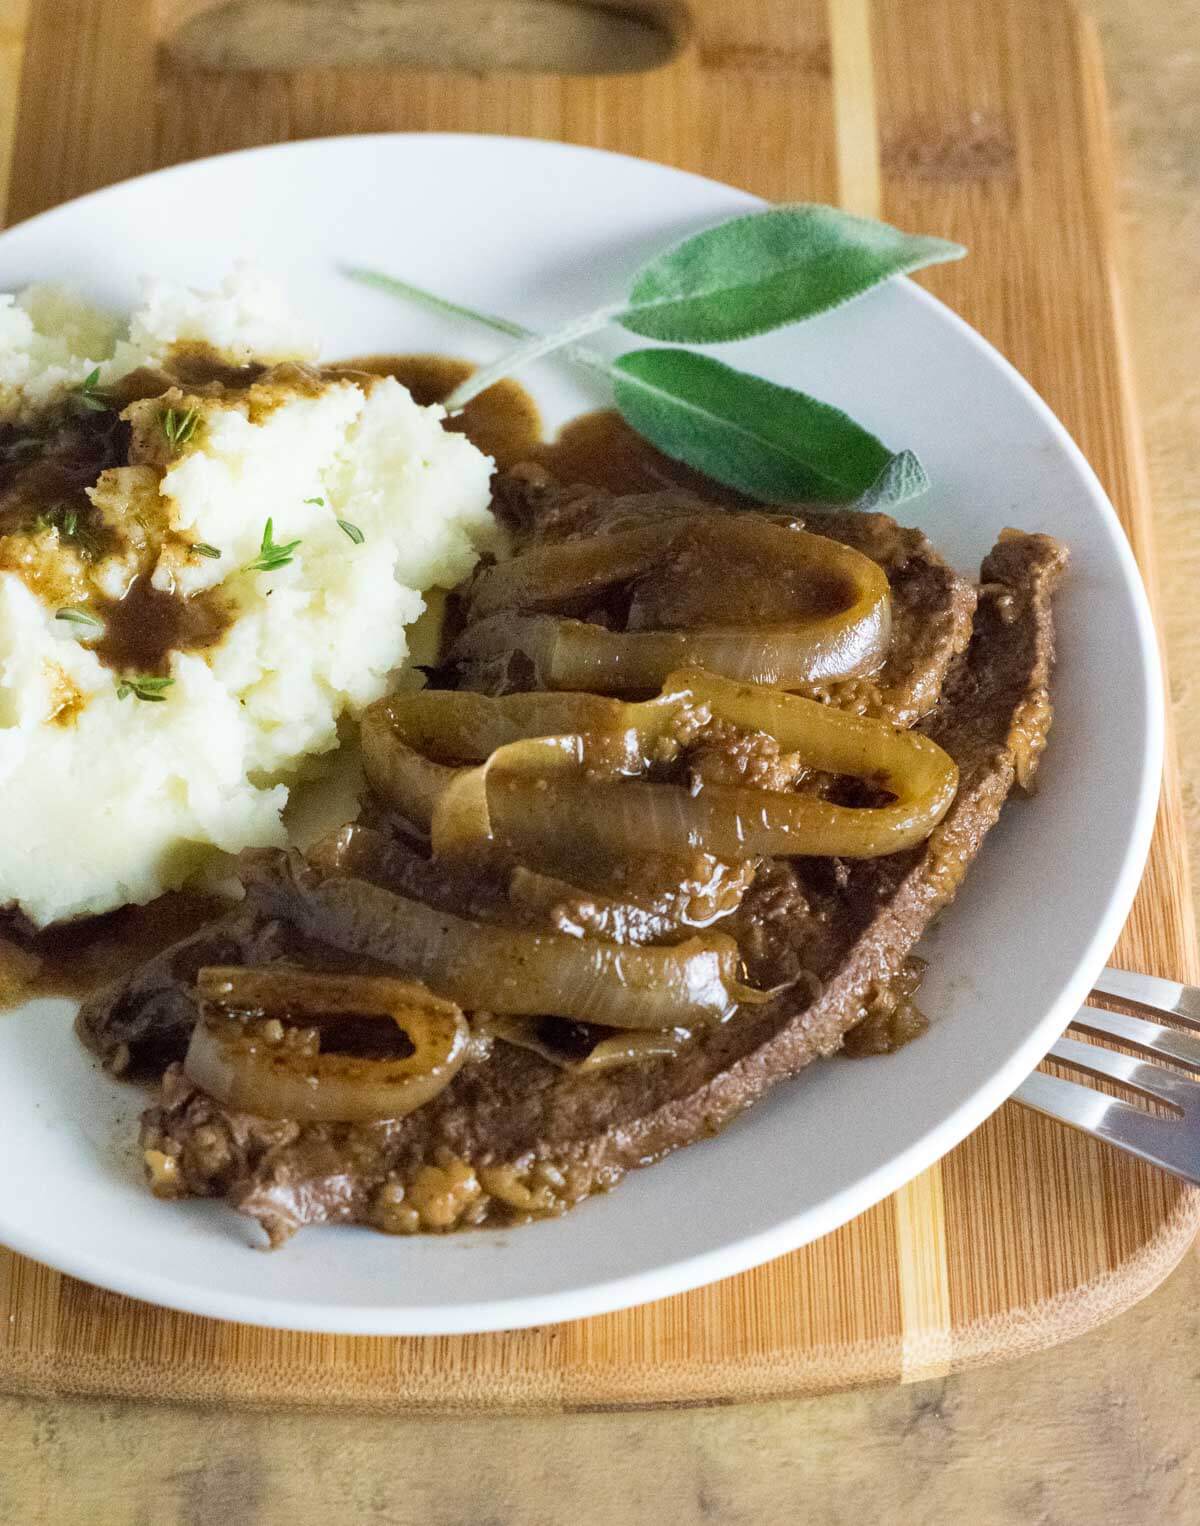 Serving old fashioned liver and onions with gravy and mashed potatoes.